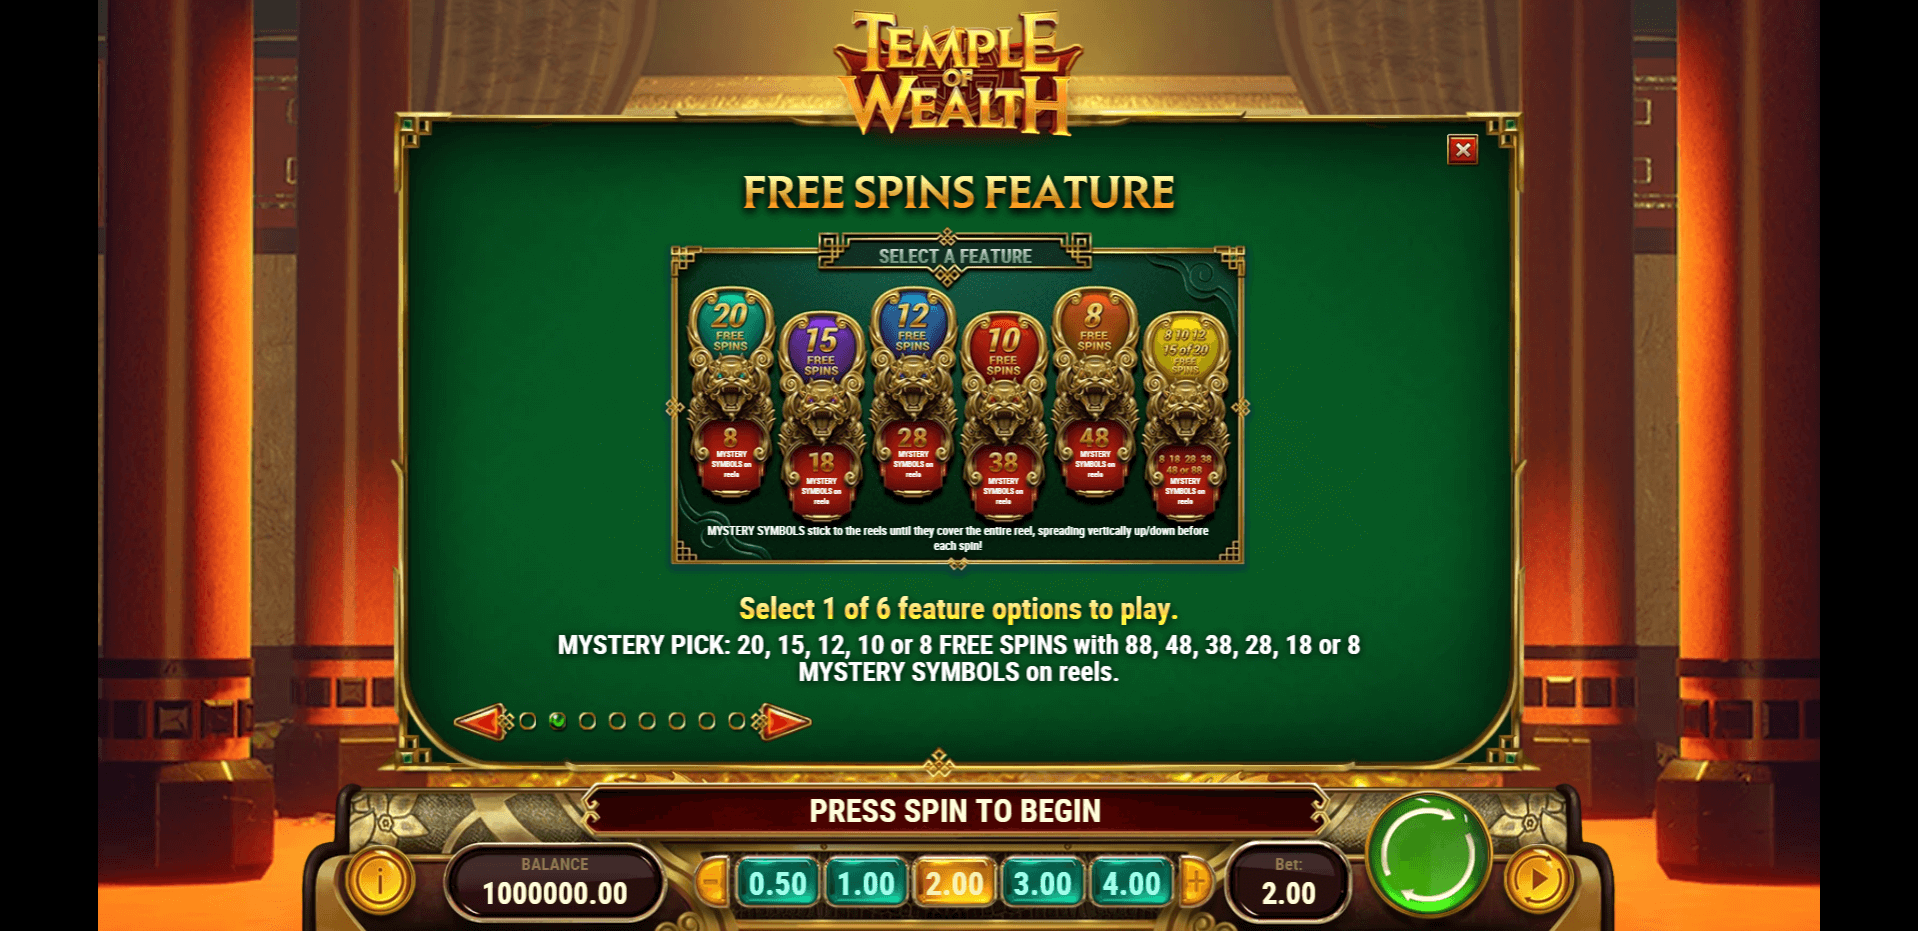 temple of wealth slot machine detail image 1